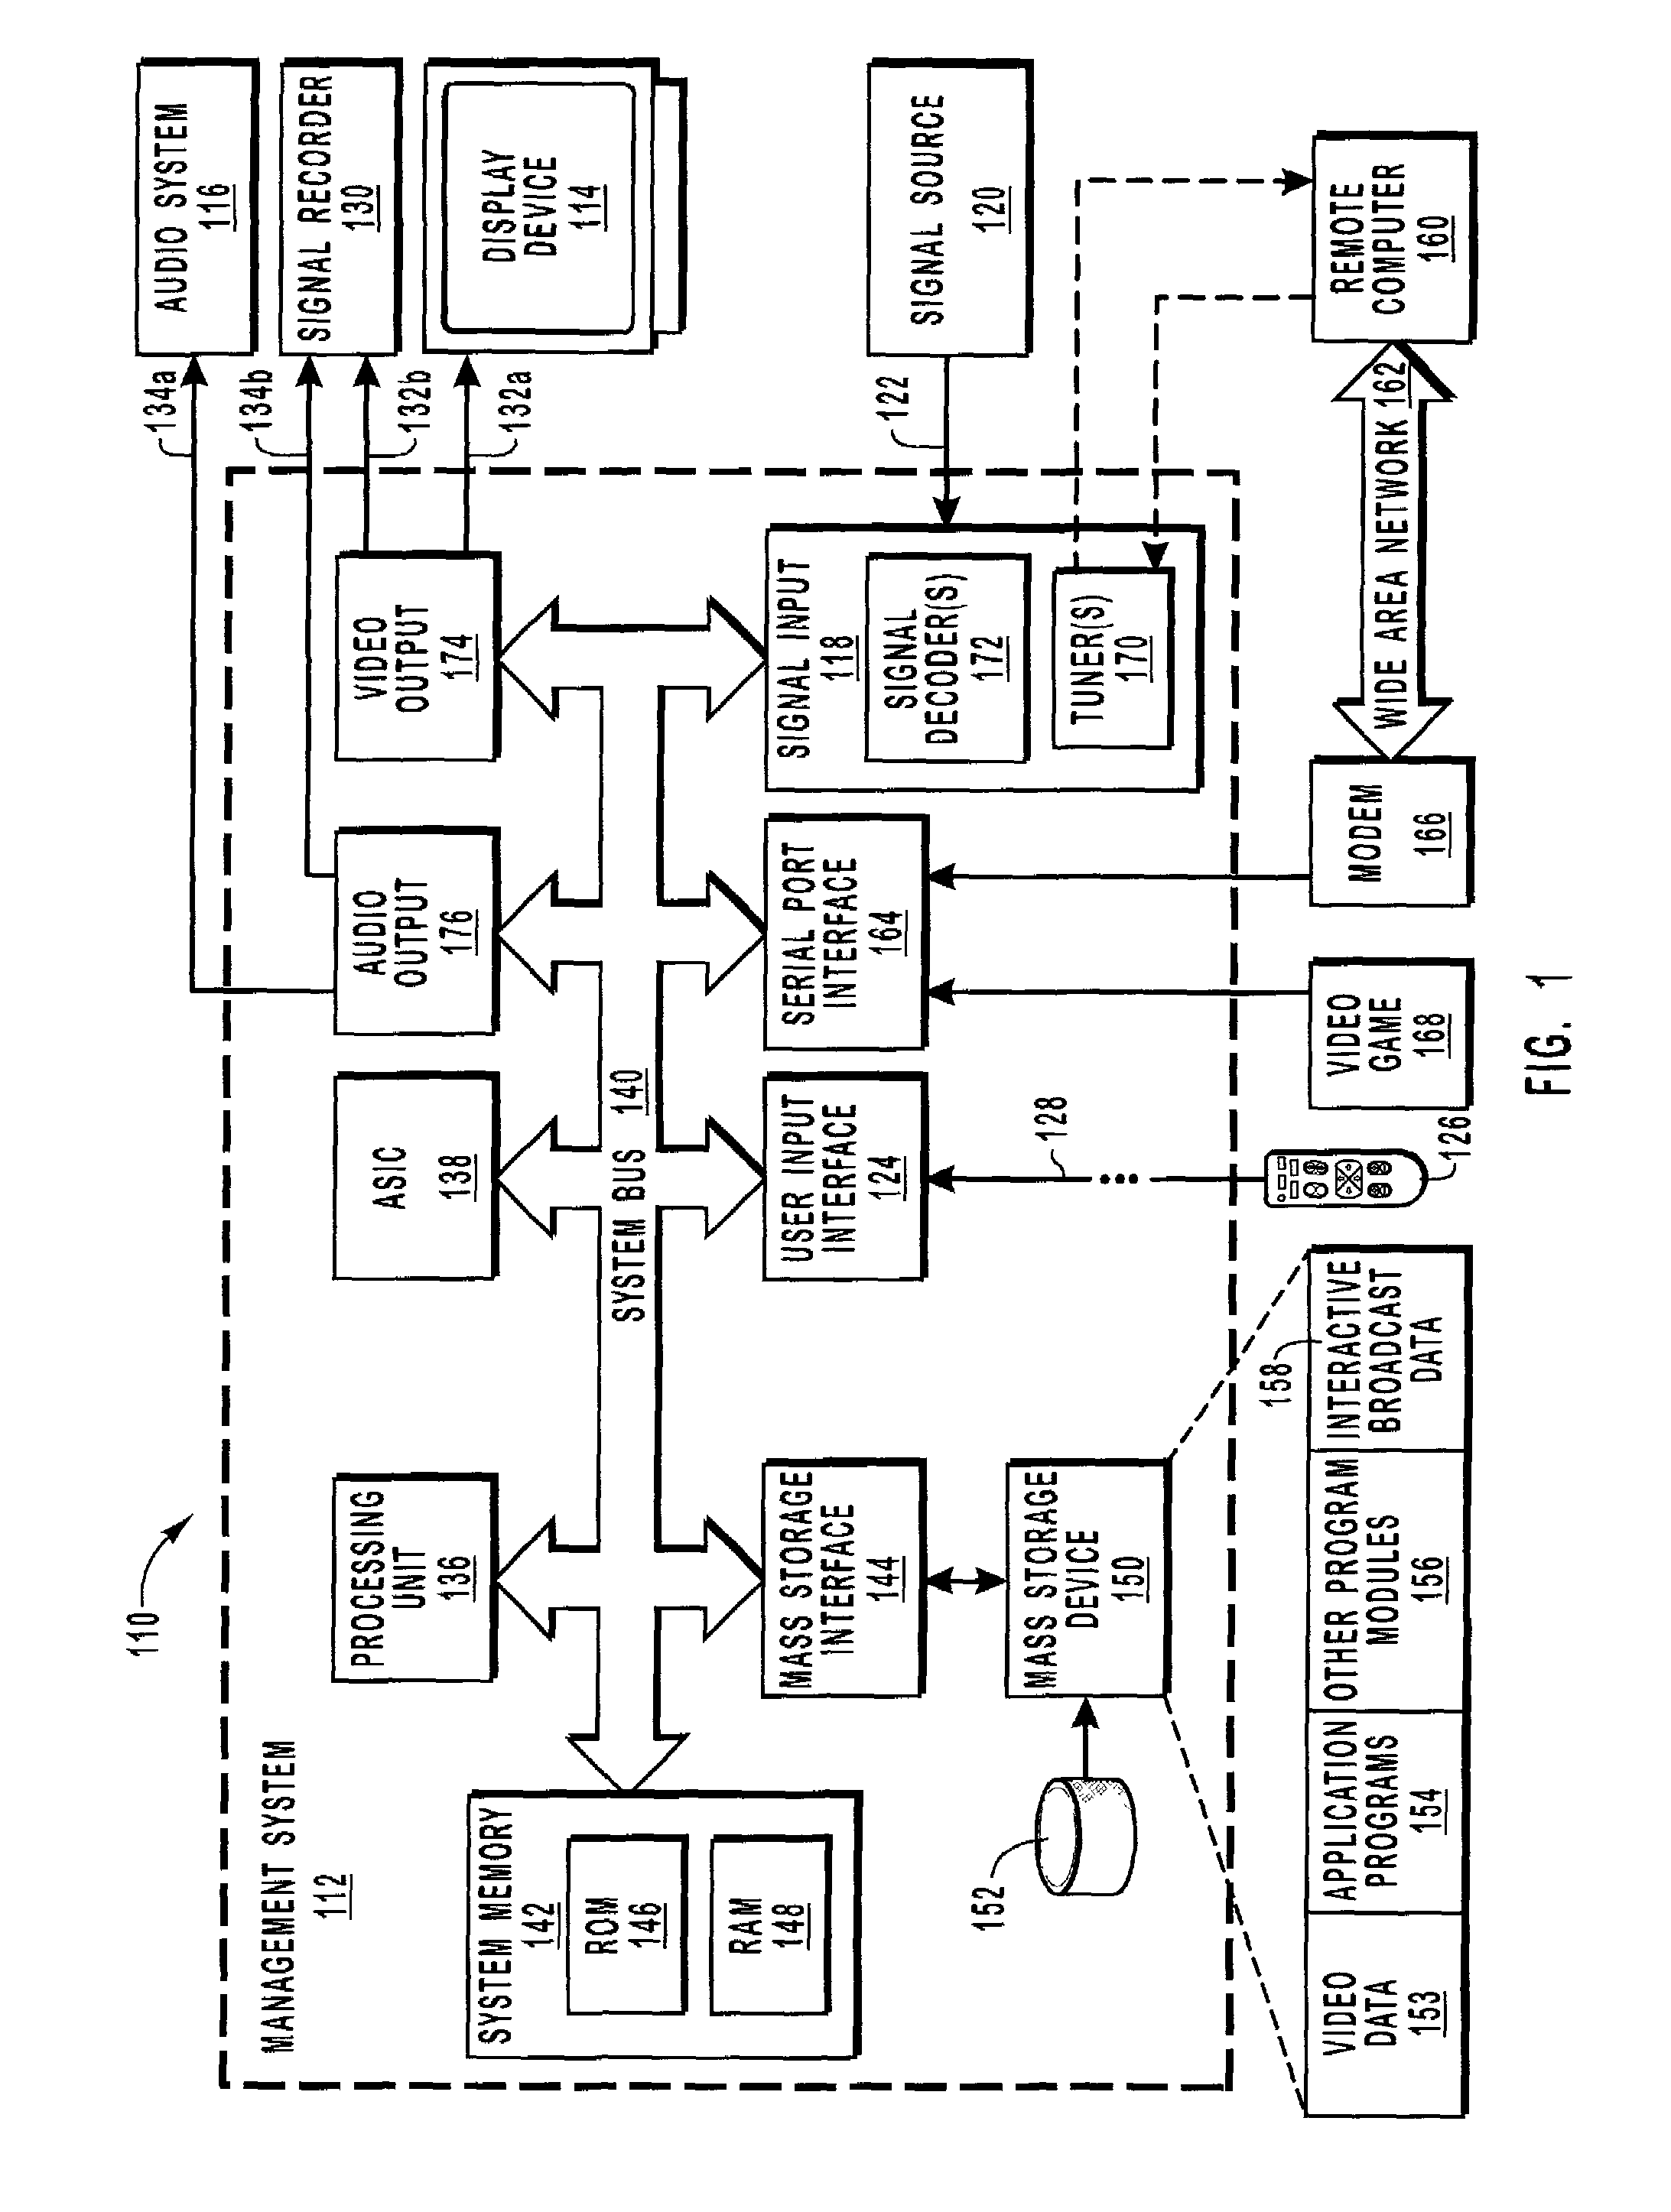 System and methods for searching interactive broadcast data